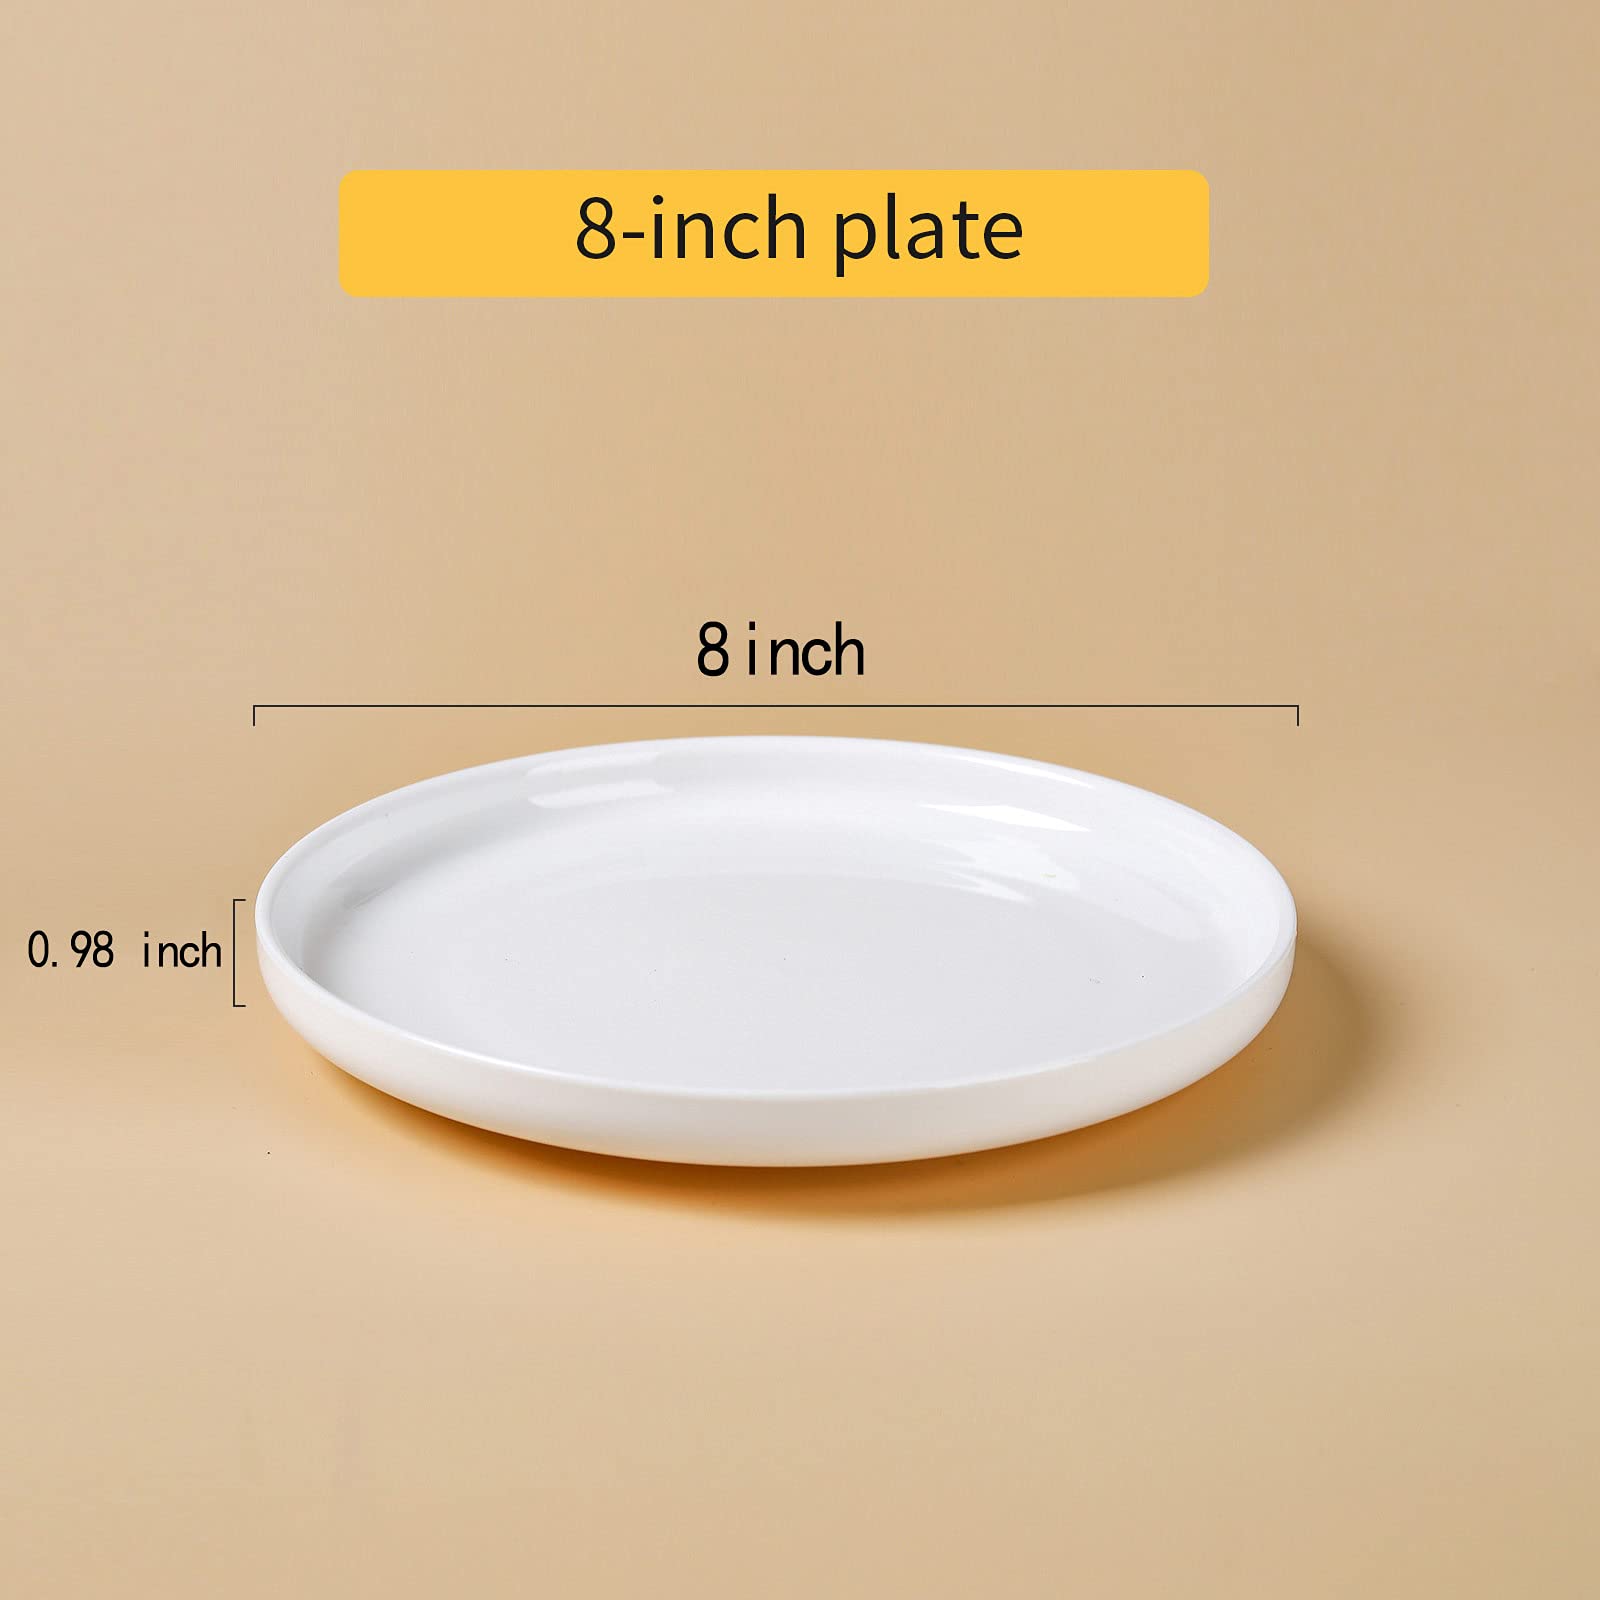 QFULL Ceramic White Dinner Plate Set of 6, 8 Inch Cutlery Set, Pizza Salad Pasta Steak Porcelain Plate Restaurant Dishes, Salad Plate, Anti-Scratch Round Plate